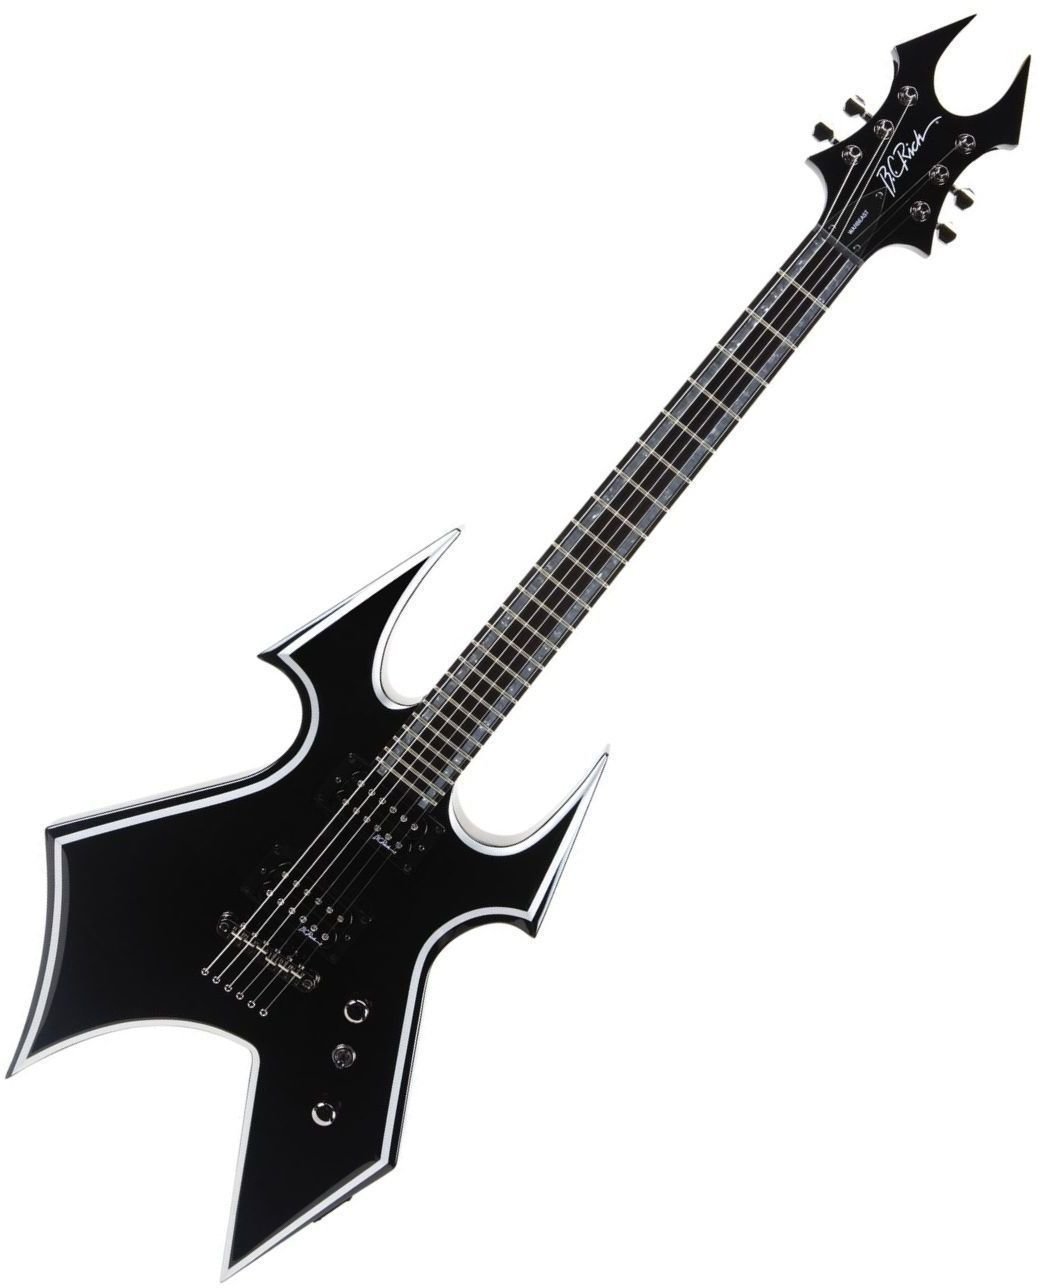 Electric guitar BC RICH Trace Warbeast Onyx Black Guitar